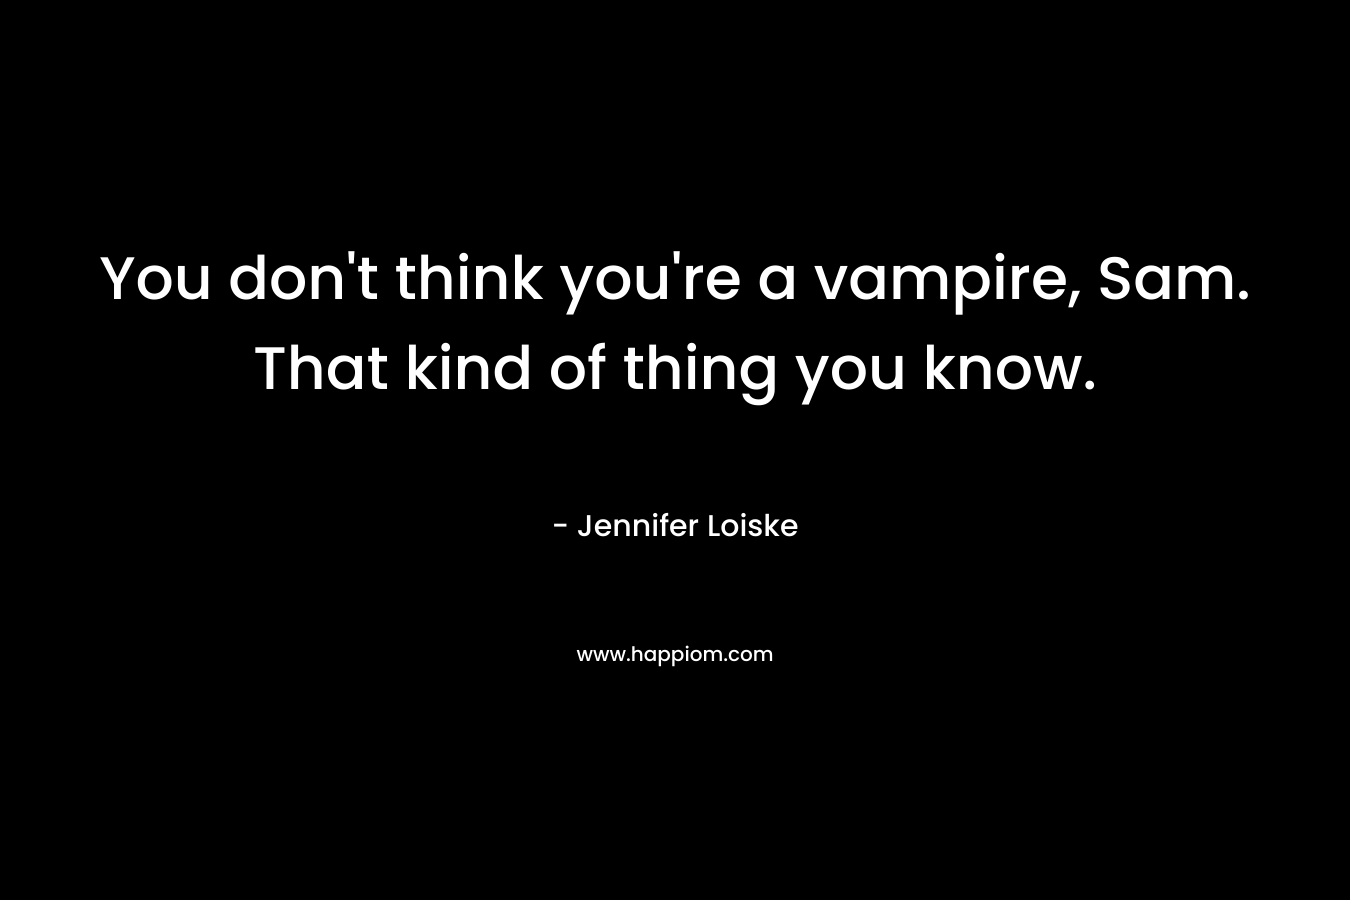 You don't think you're a vampire, Sam. That kind of thing you know.